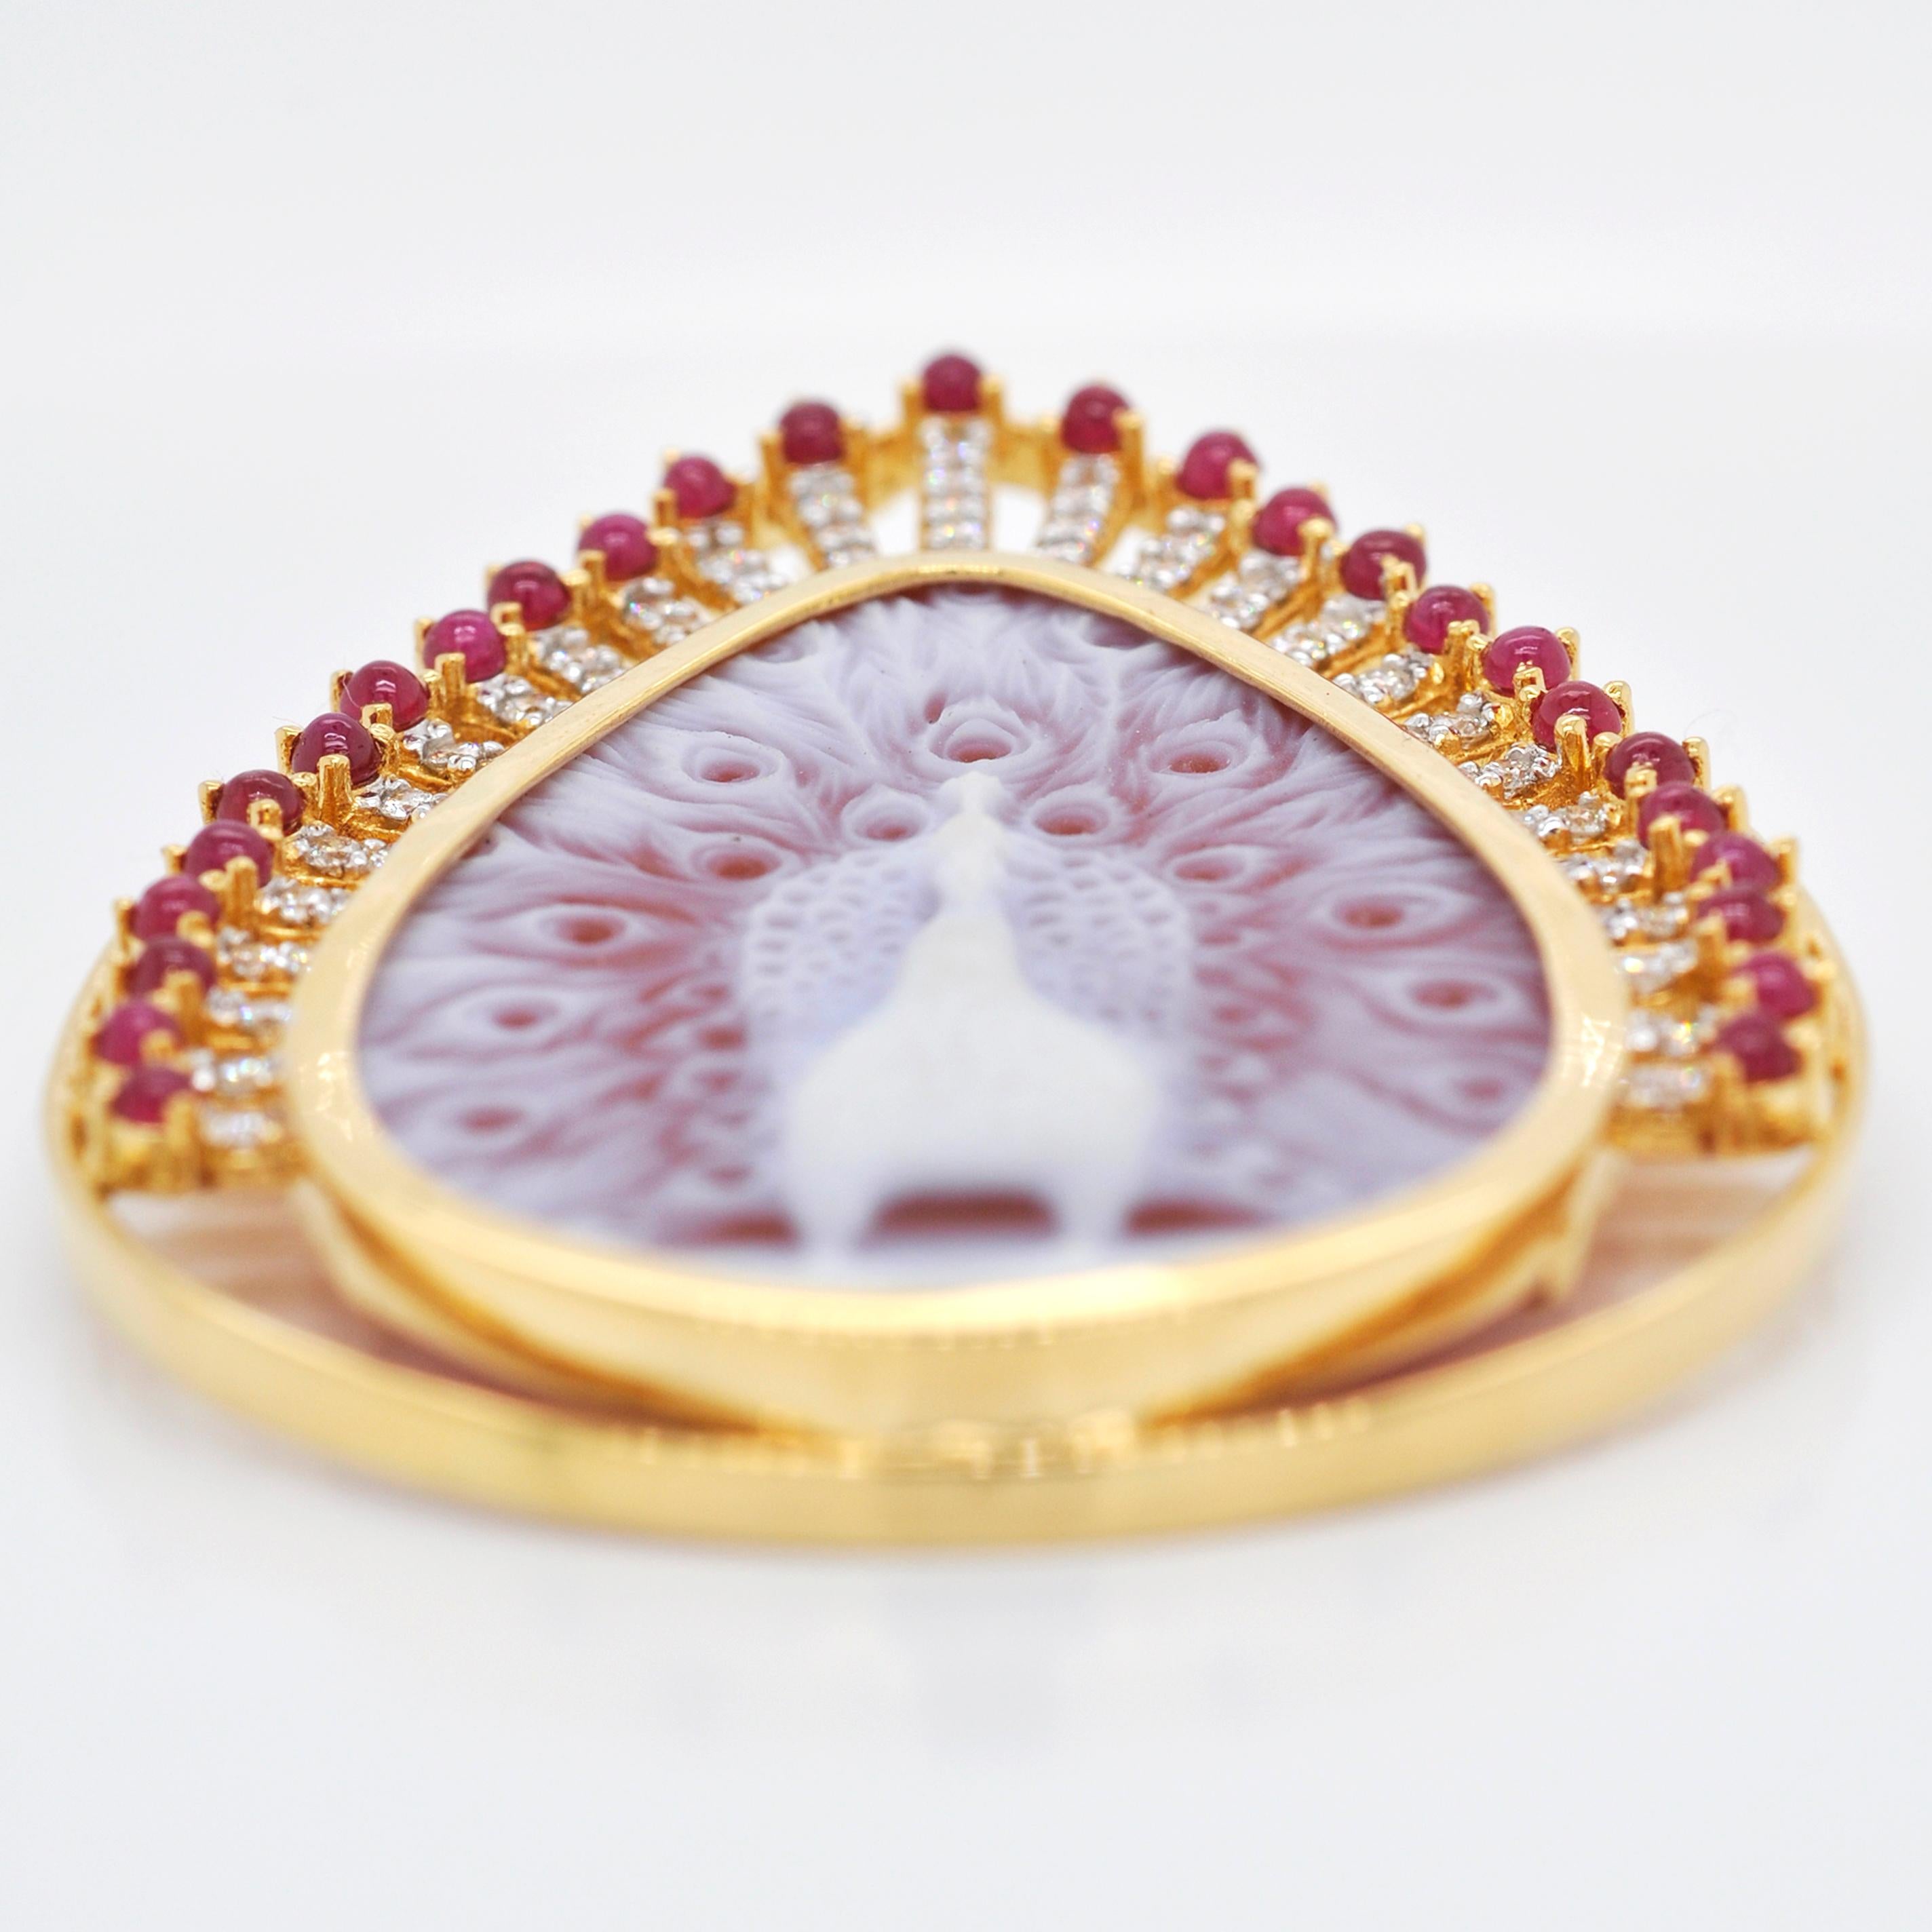 Cabochon 18 Karat Gold Peacock Agate Cameo Ruby Diamond Pendant Brooch For Sale